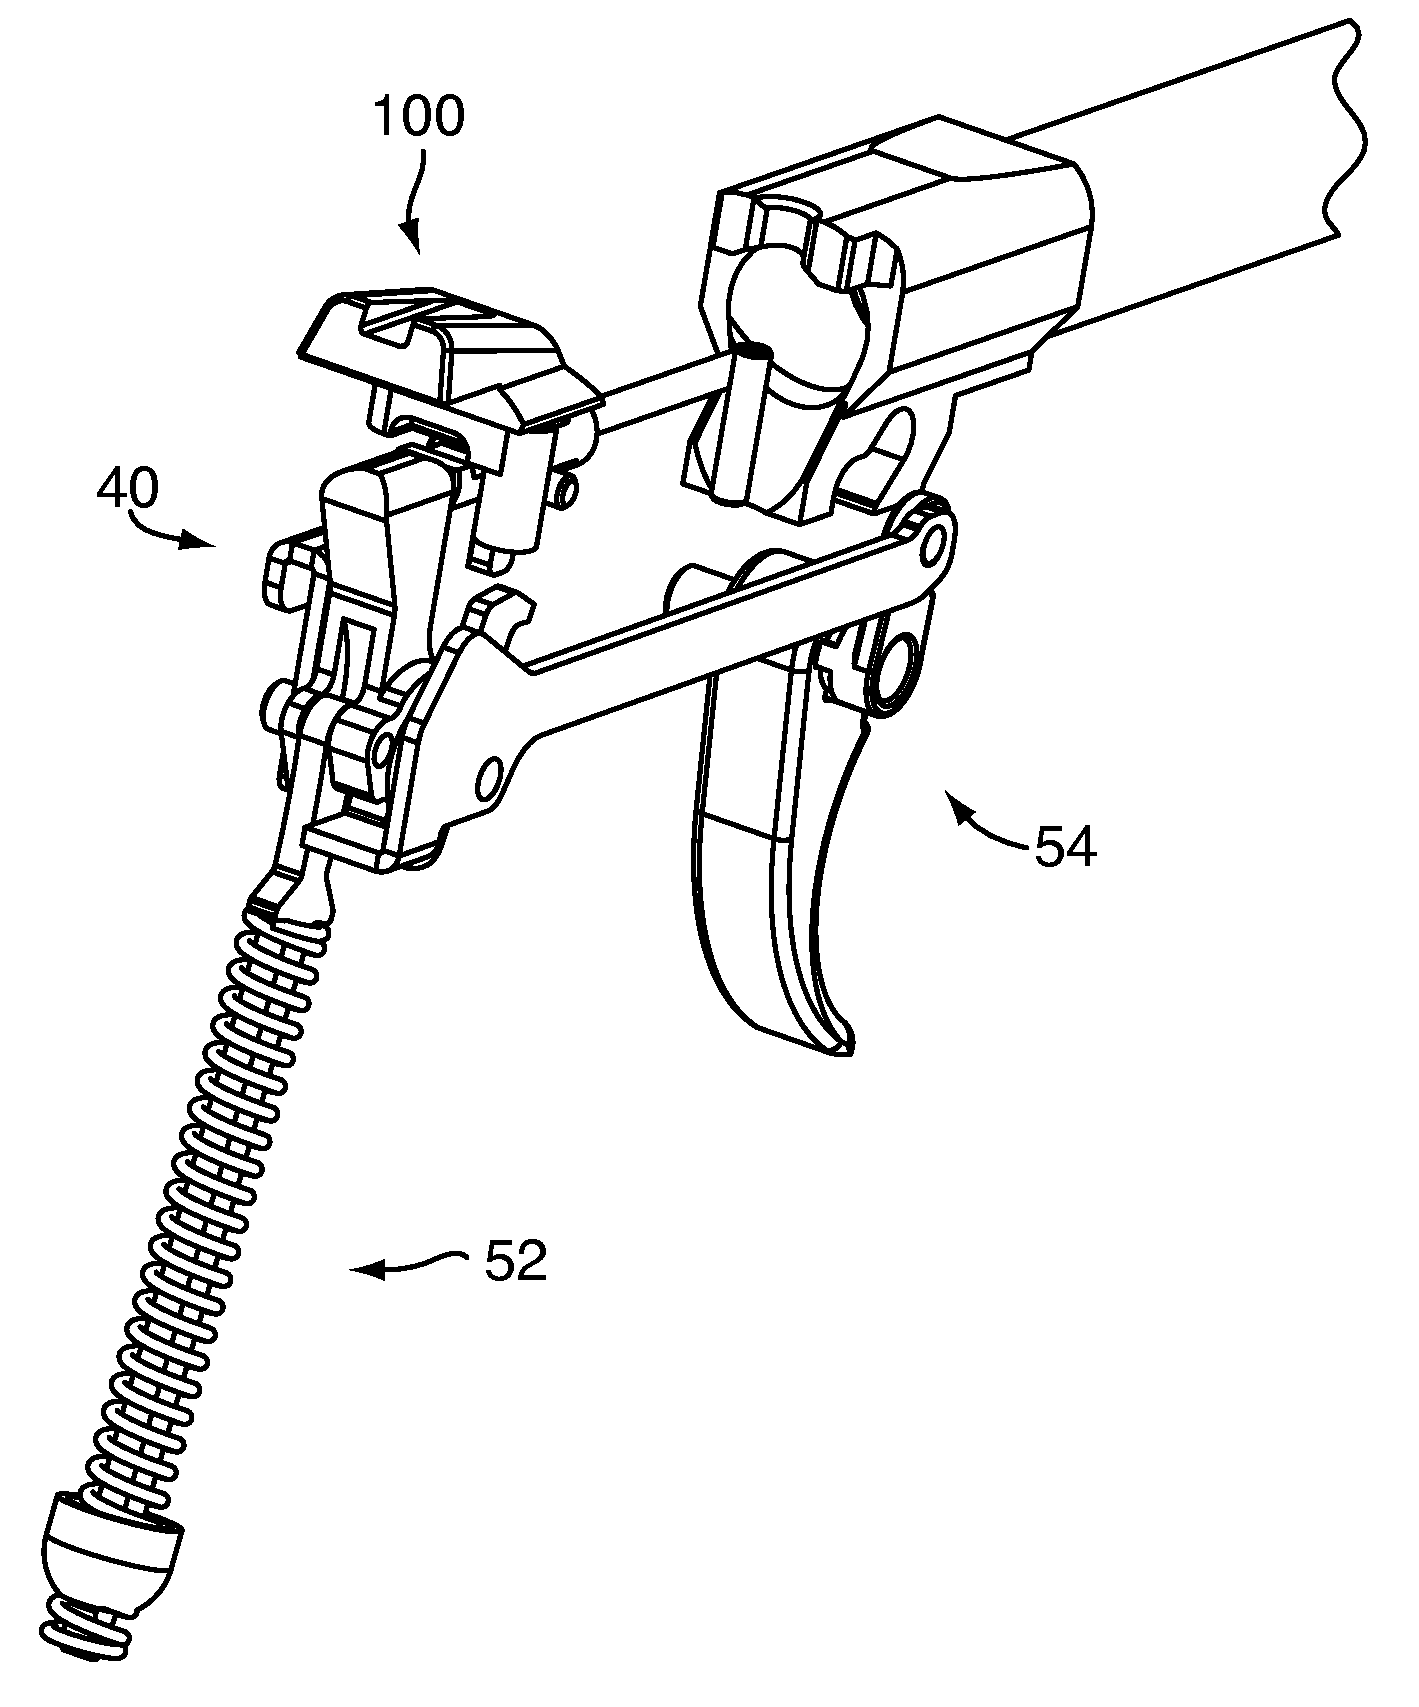 Automatic firing pin block safety for a firearm